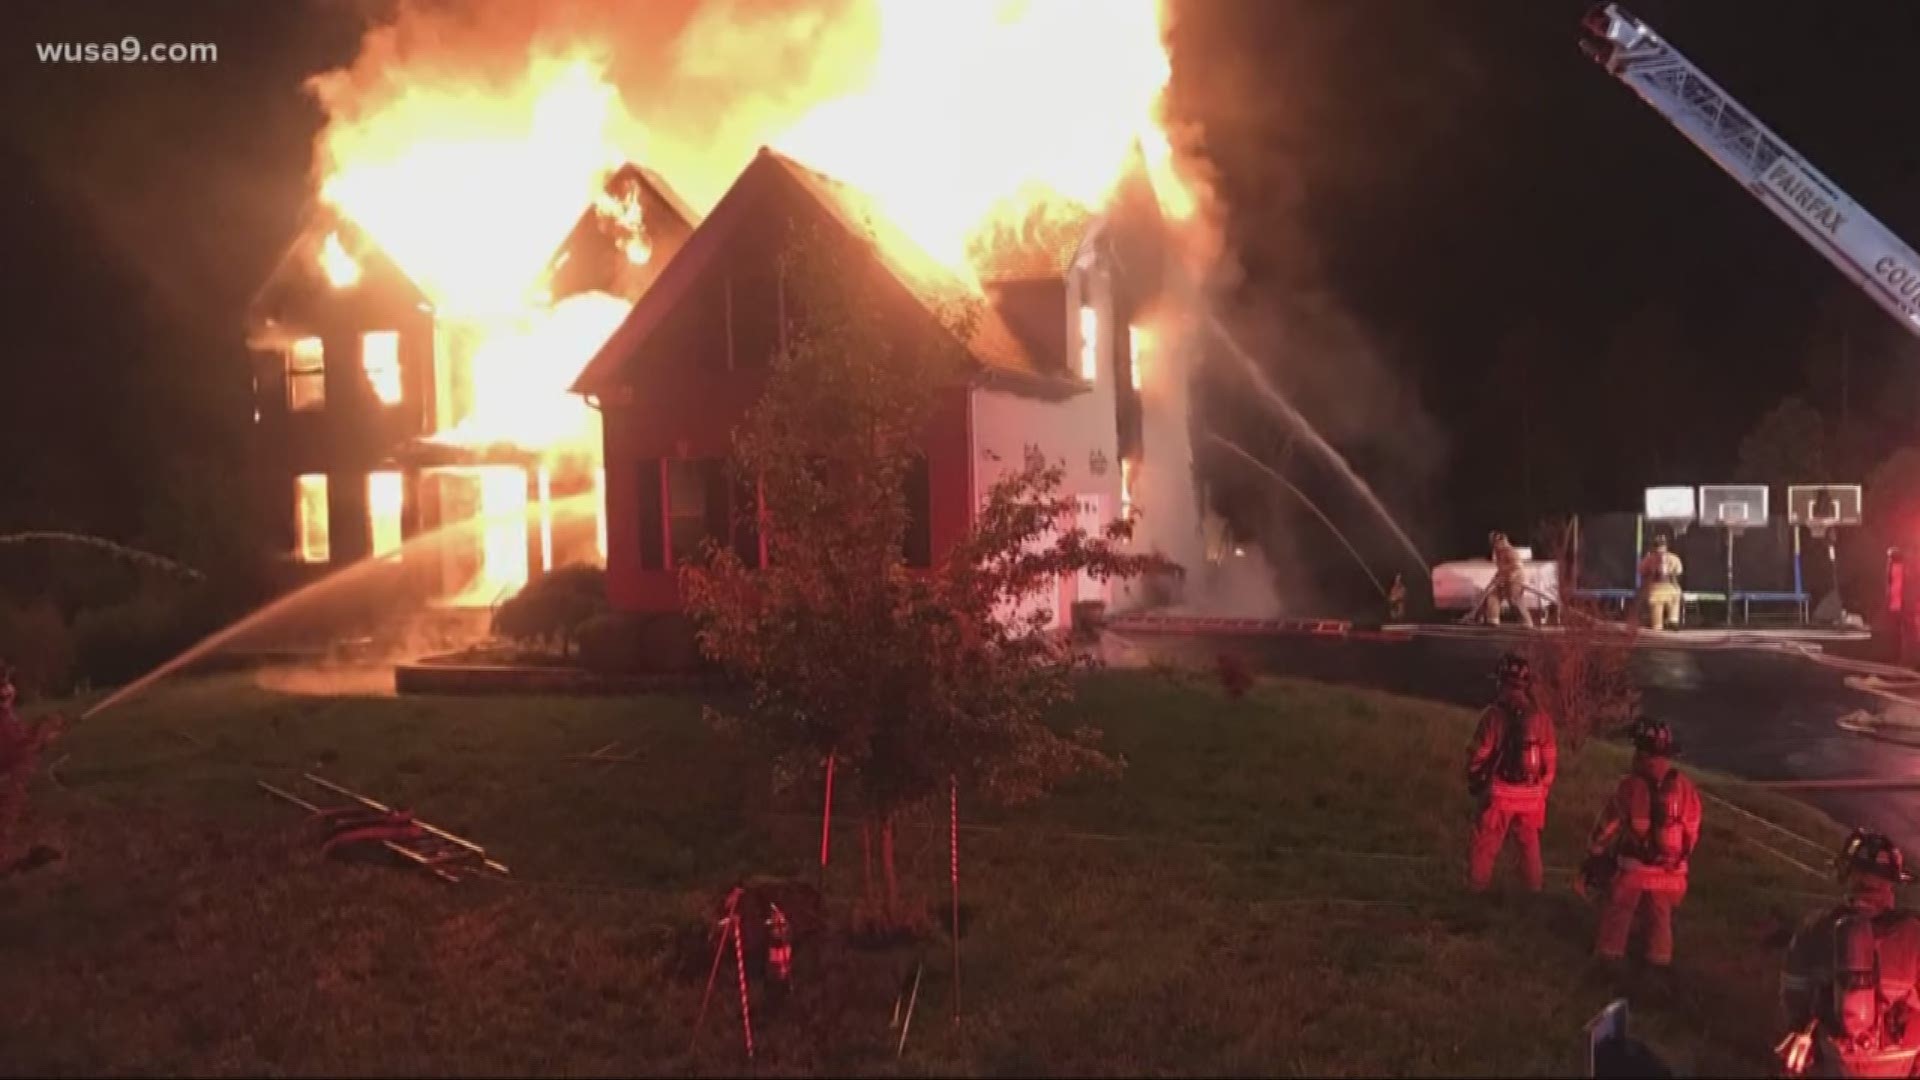 A Fairfax County family lost everything in a late-night fire. Now, they are trying to figure out what comes next.